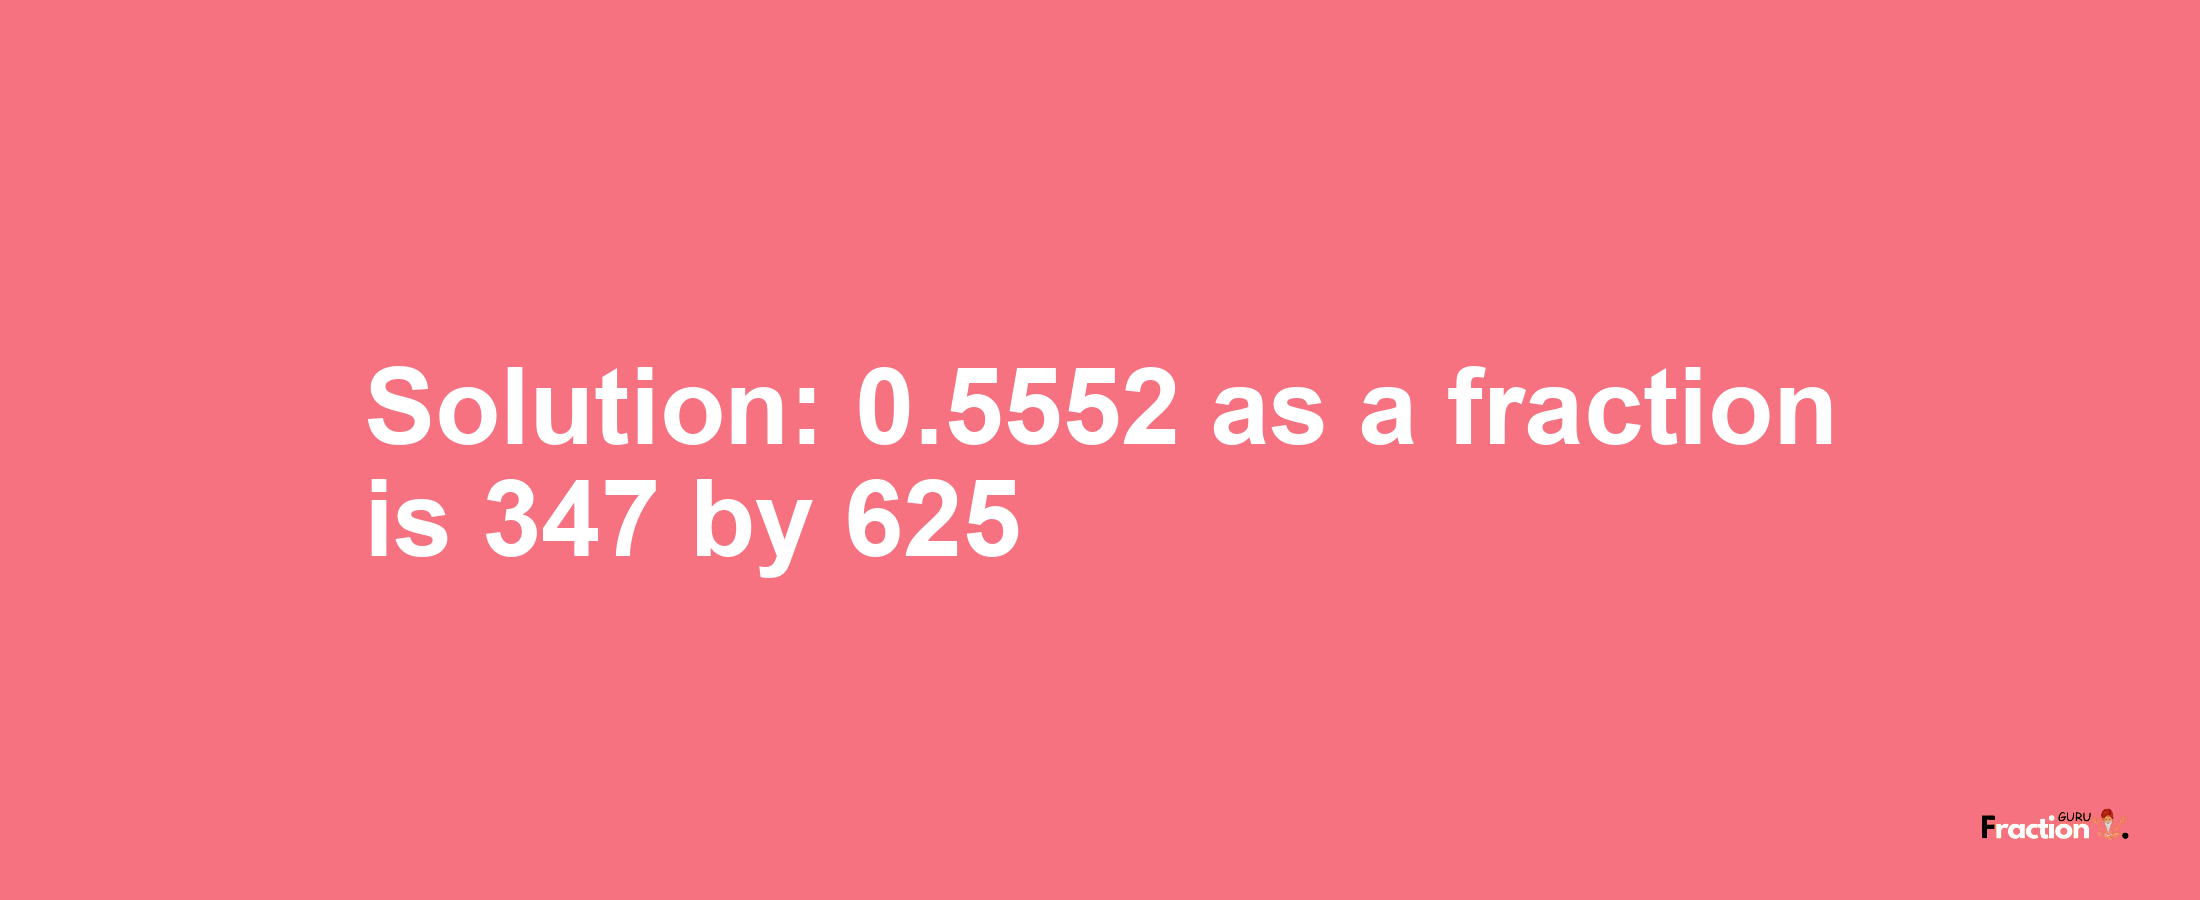 Solution:0.5552 as a fraction is 347/625